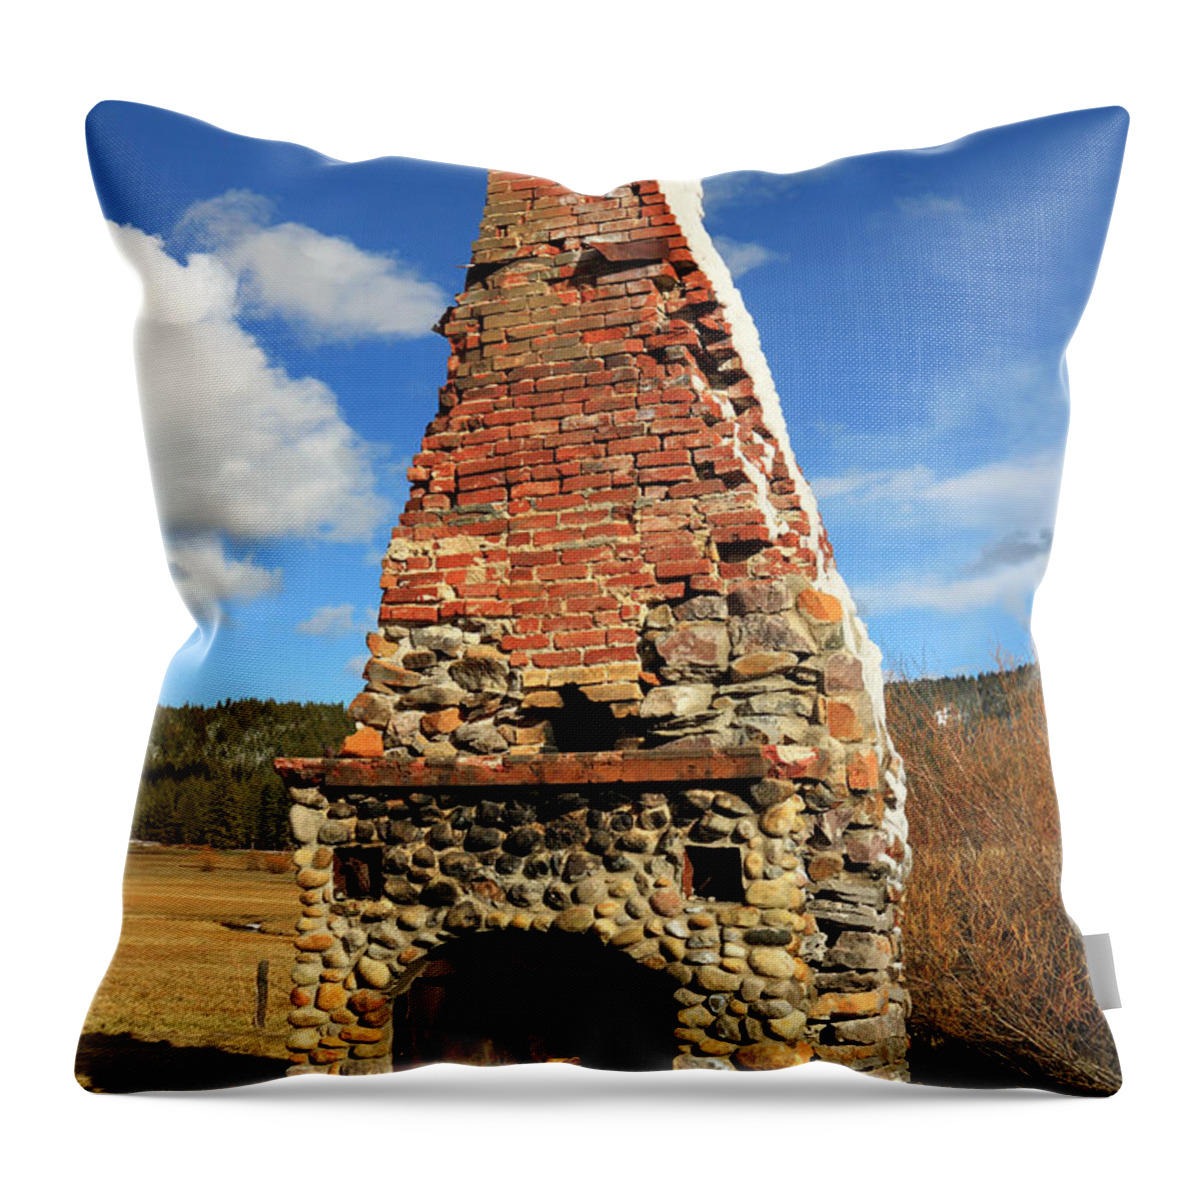 Chimney Throw Pillow featuring the photograph The Chimney by James Eddy